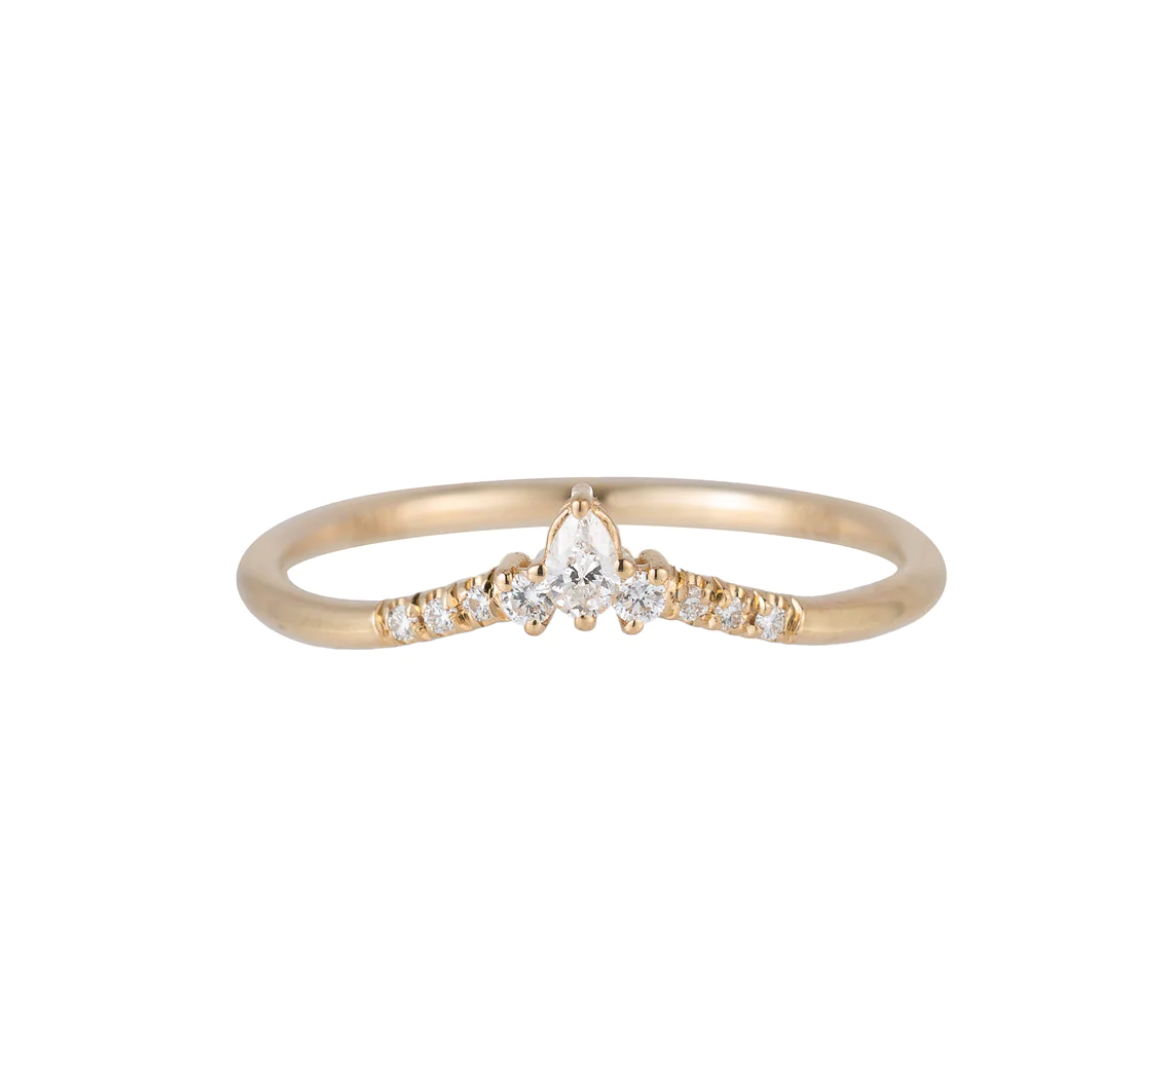 a slightly curved gold band with round white diamonds leading to a pear shaped diamond in the center on a white background